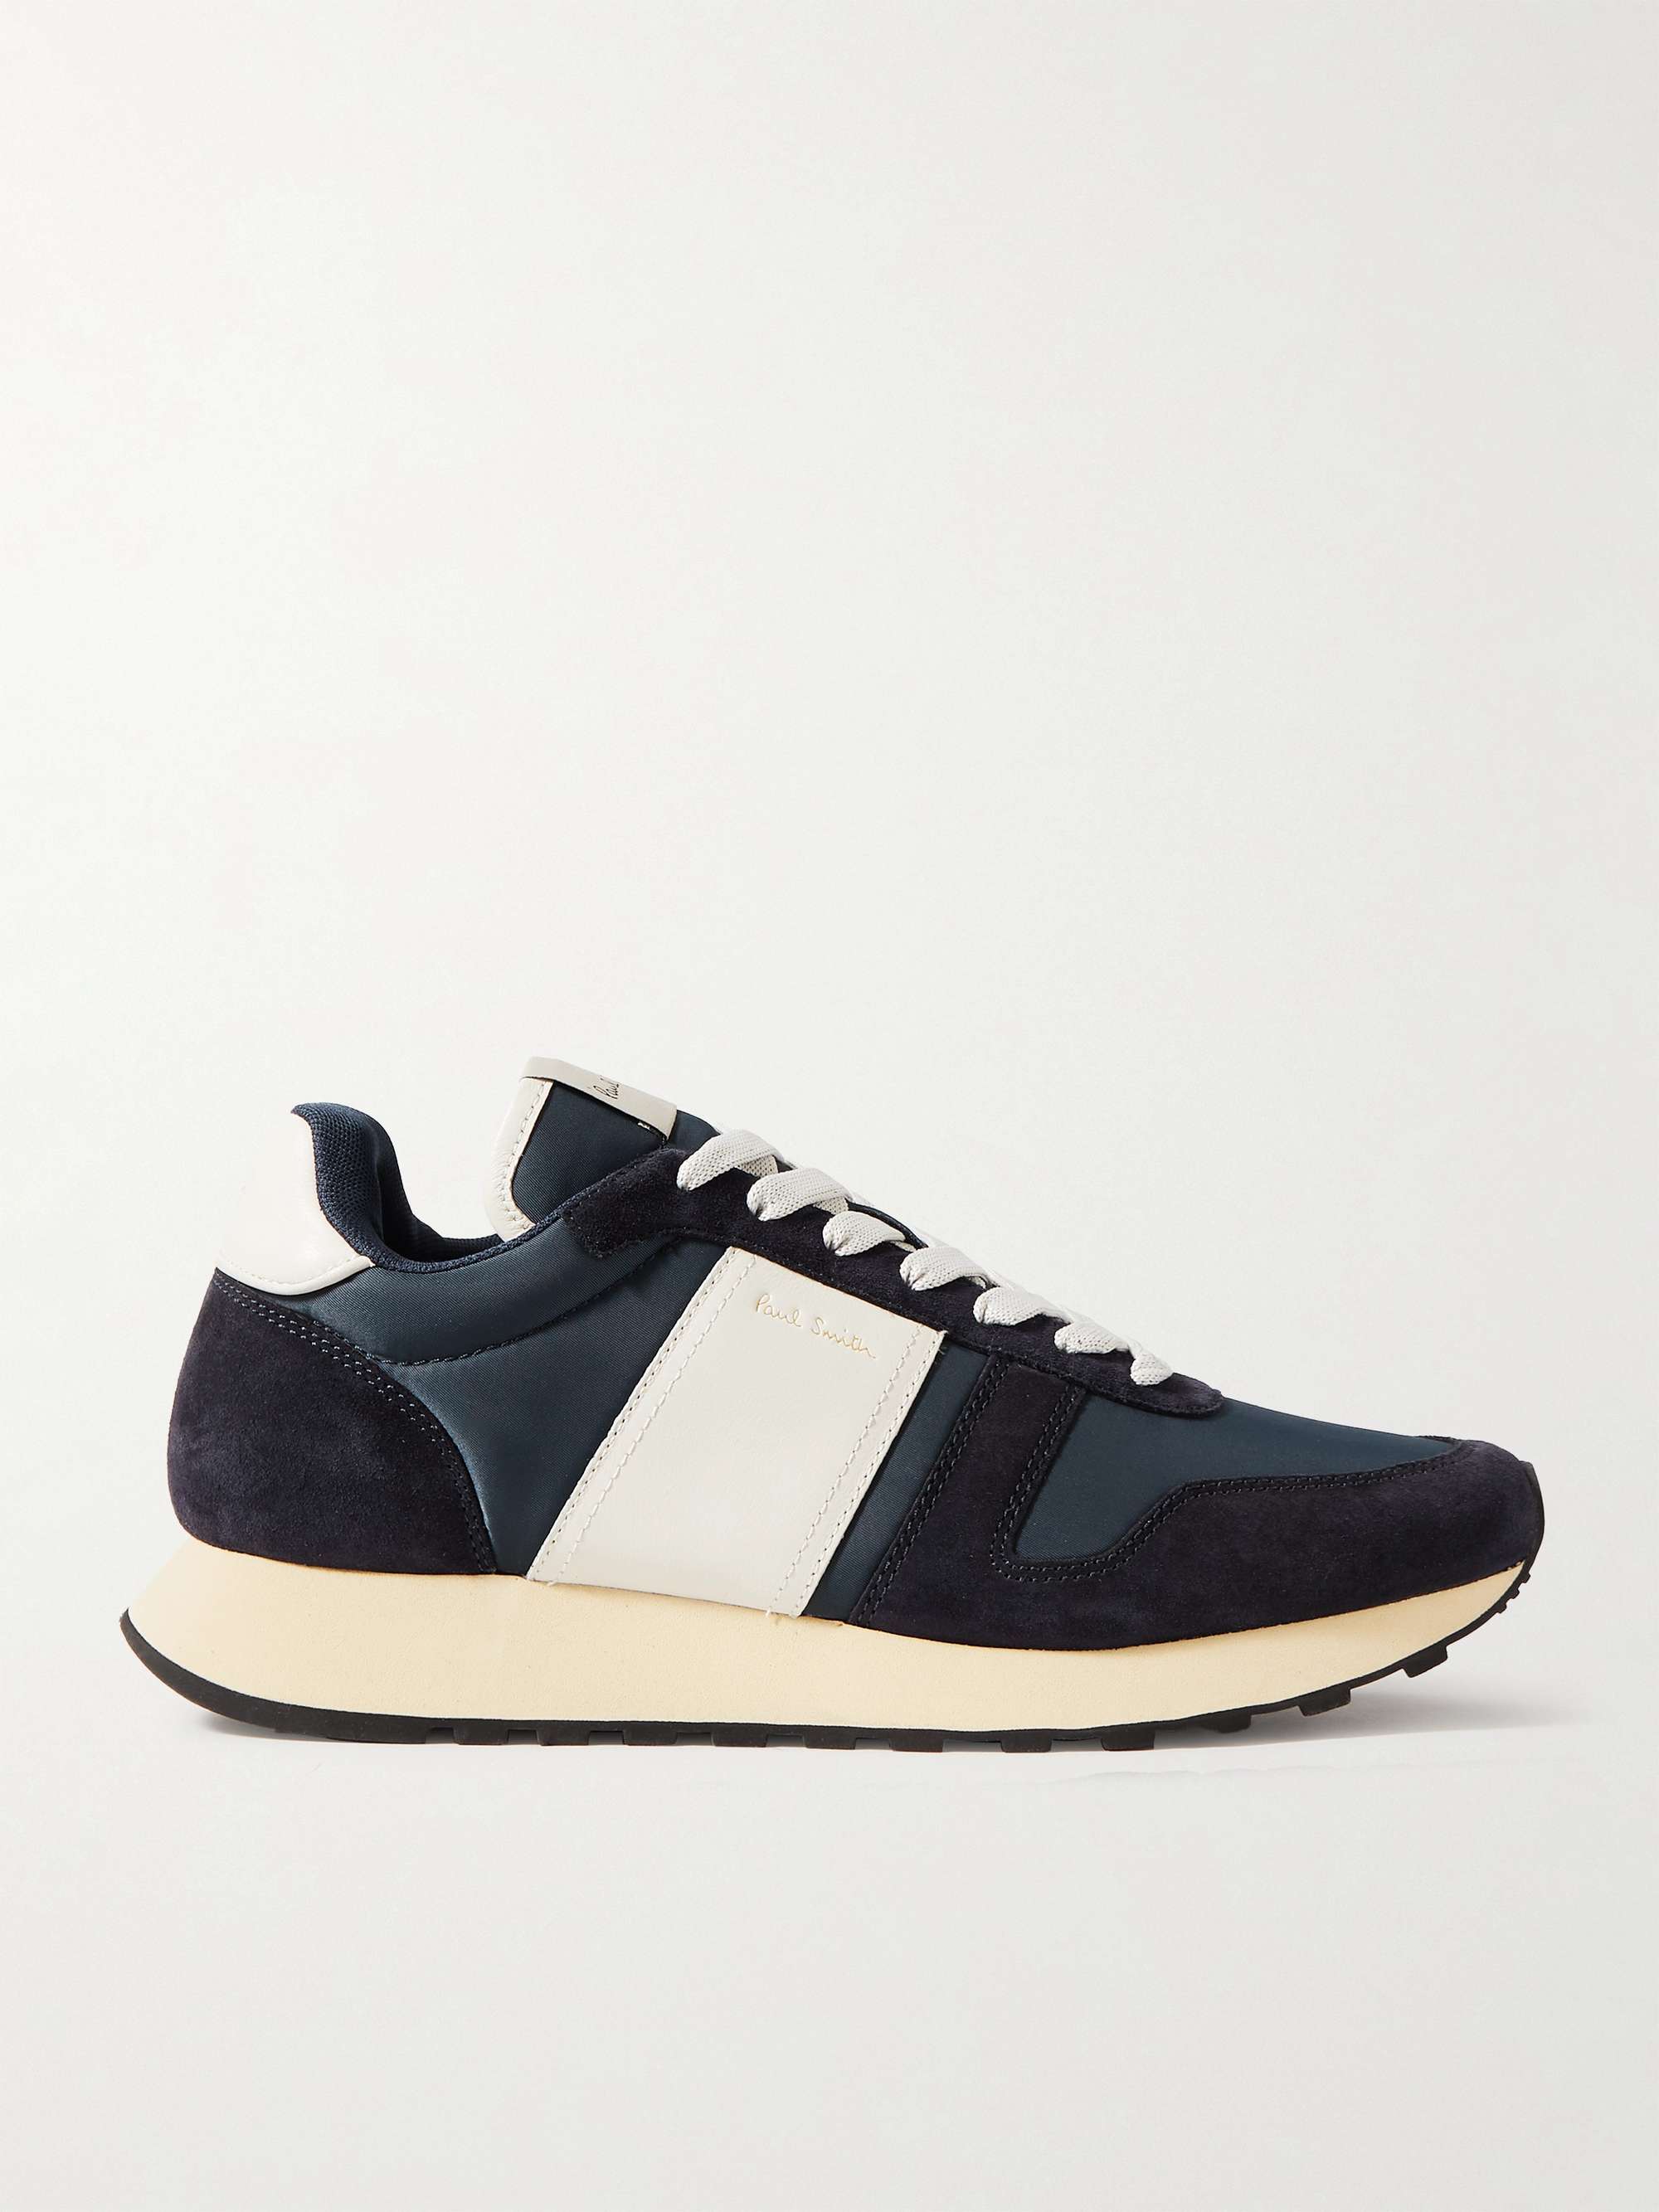 PAUL SMITH Eighties Suede and Leather Sneakers for Men | MR PORTER